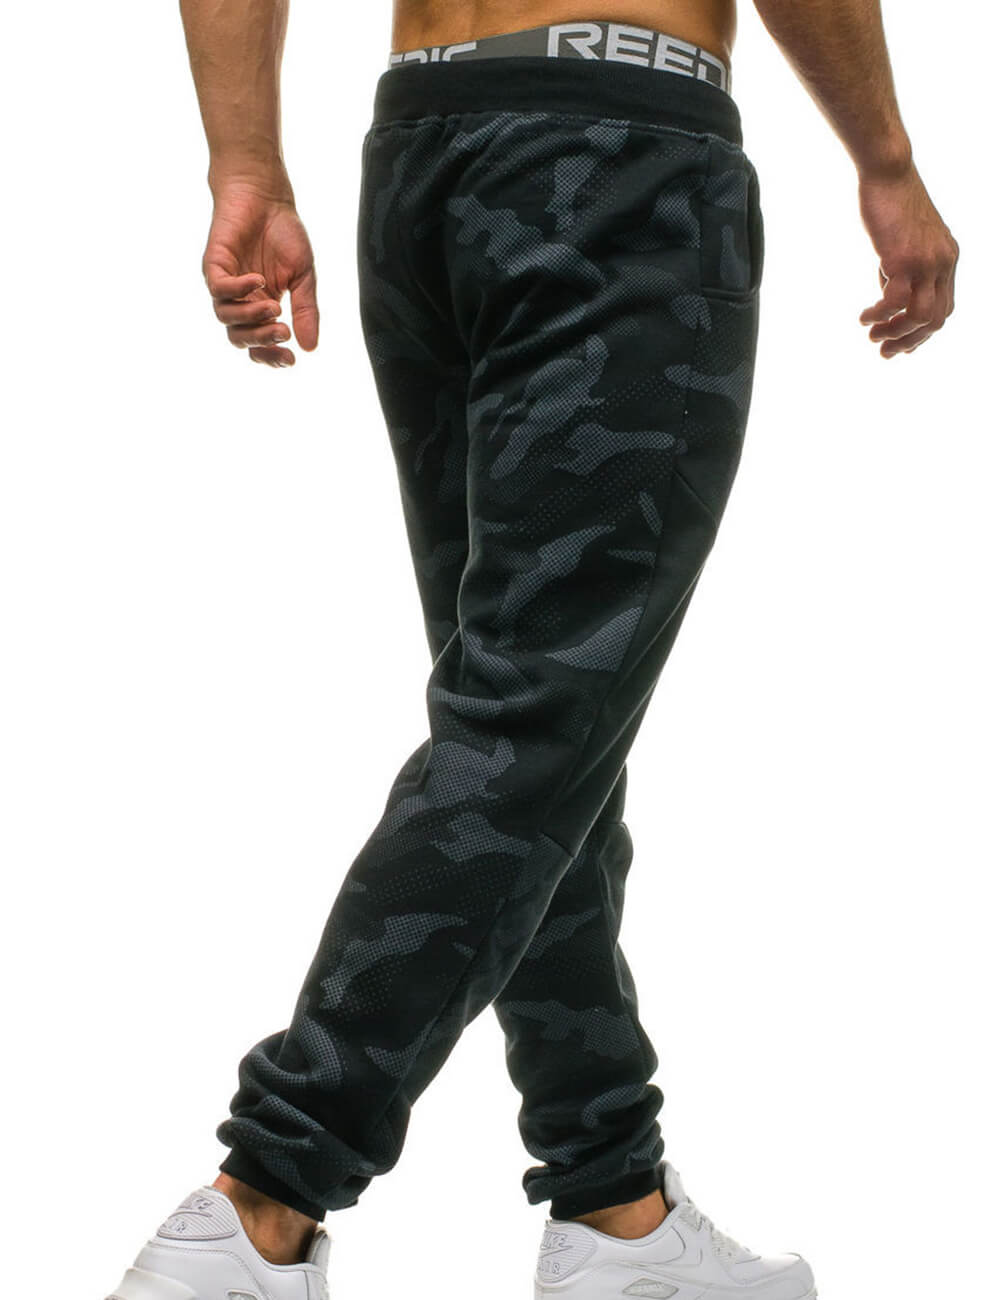  Men's Loose Camo Hip Pop High Rise Patch Work Cropped Beam Pants Sweatpants Joggers Overall Cargo Pants